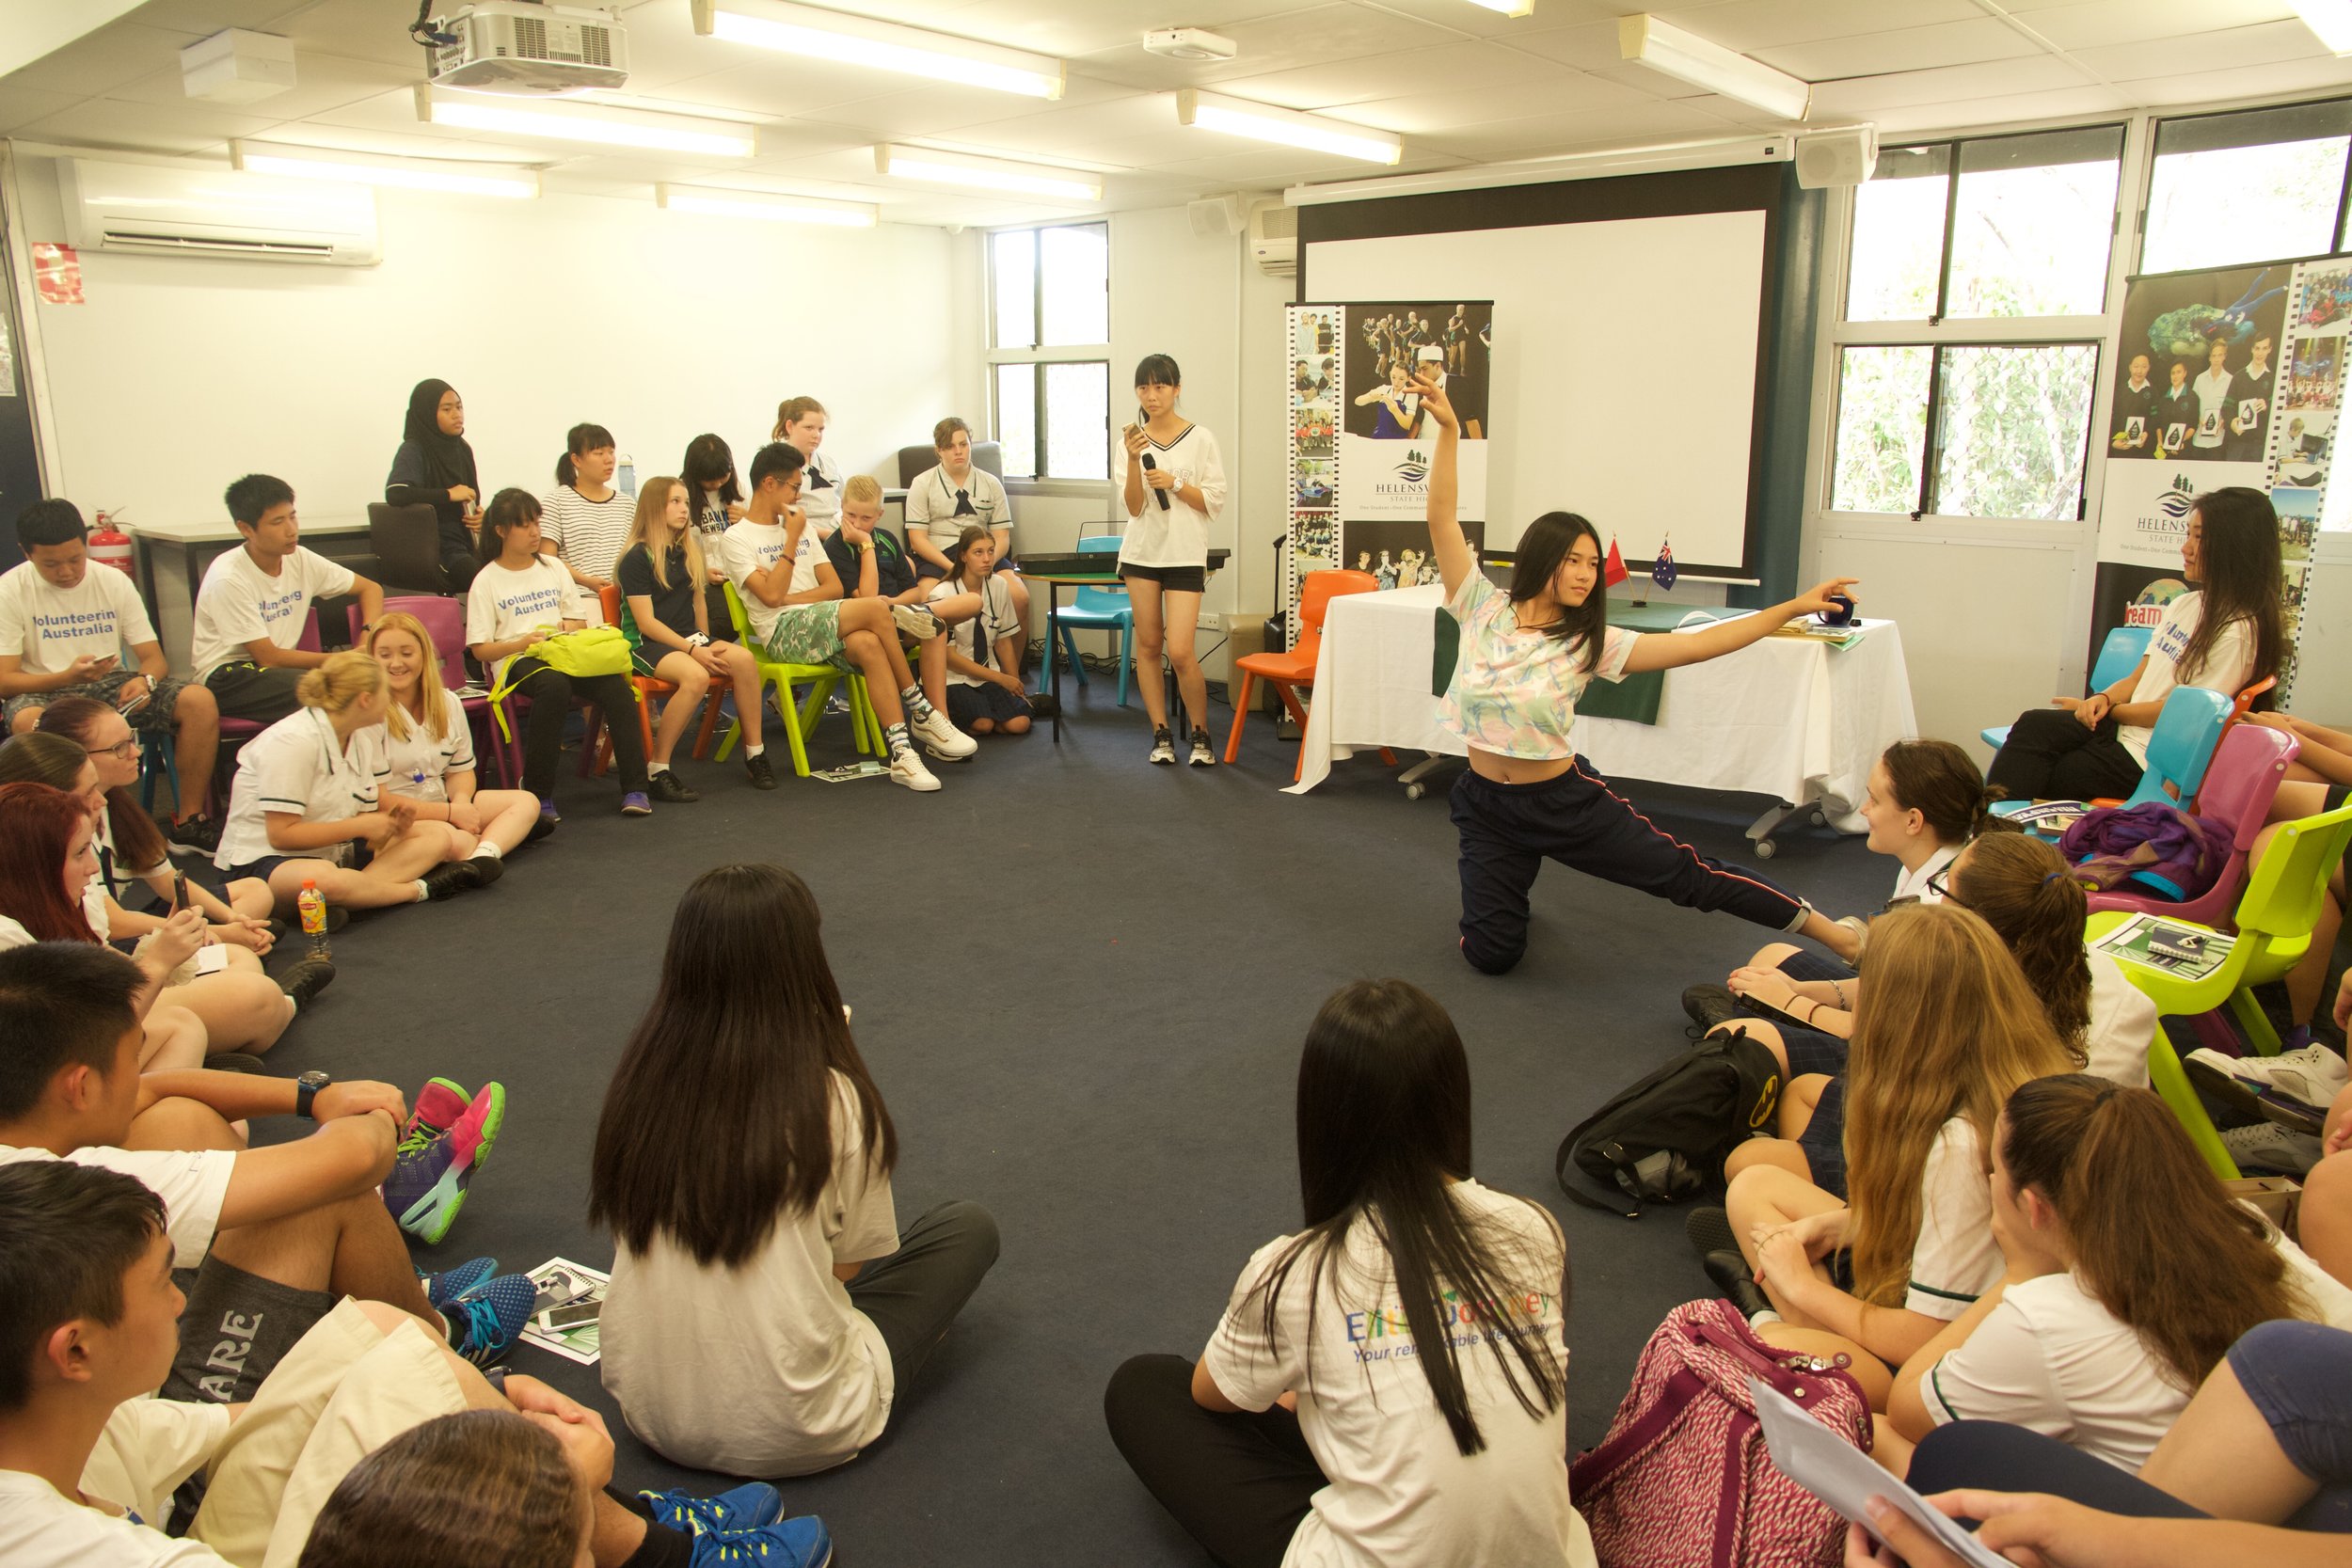 Performing for the Australian students